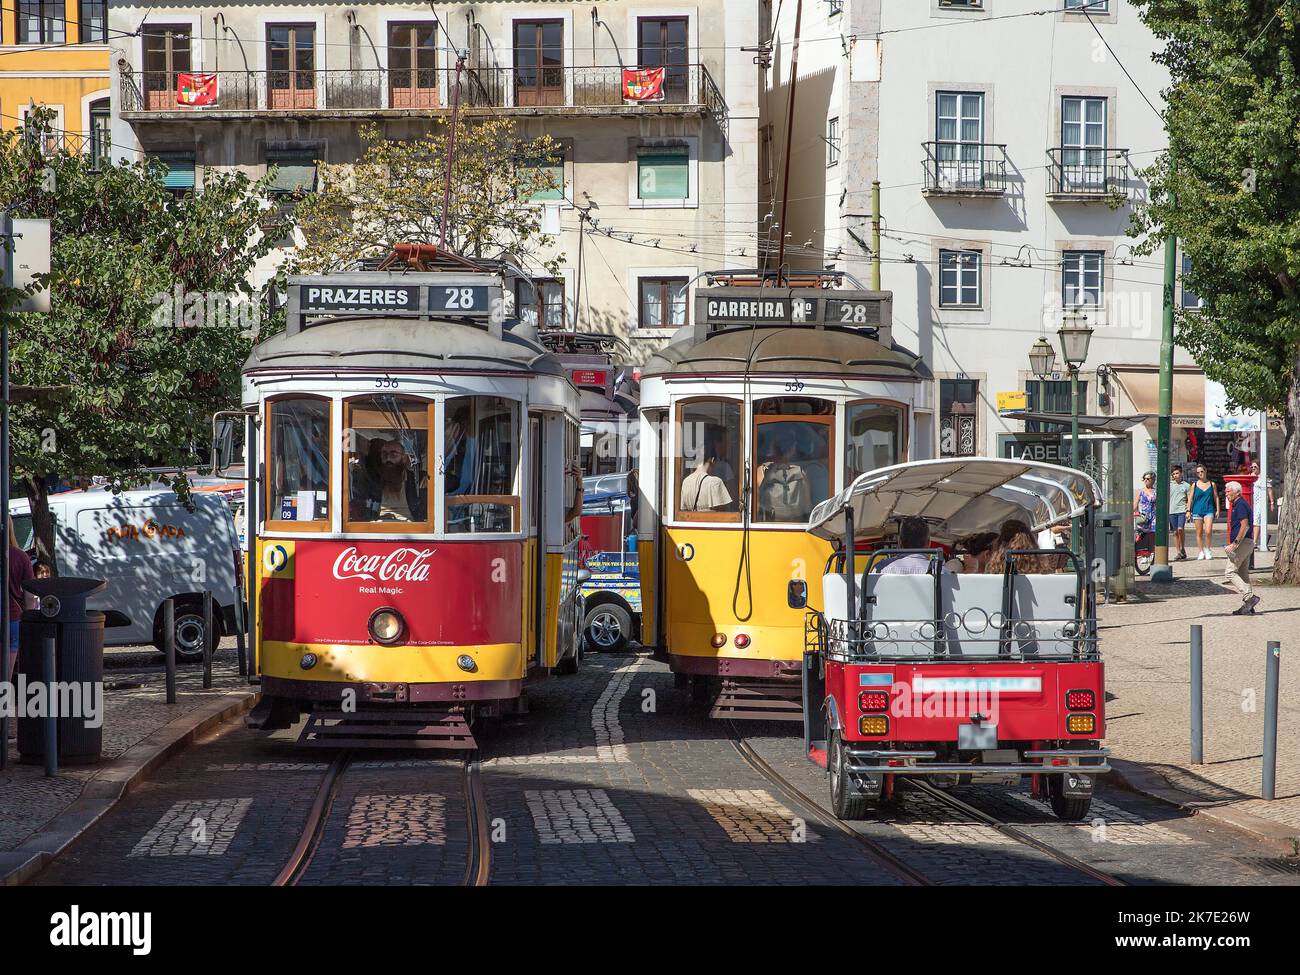 Trams and a Tuk-Tuk on the streets of Lisbon, Portugal Stock Photo